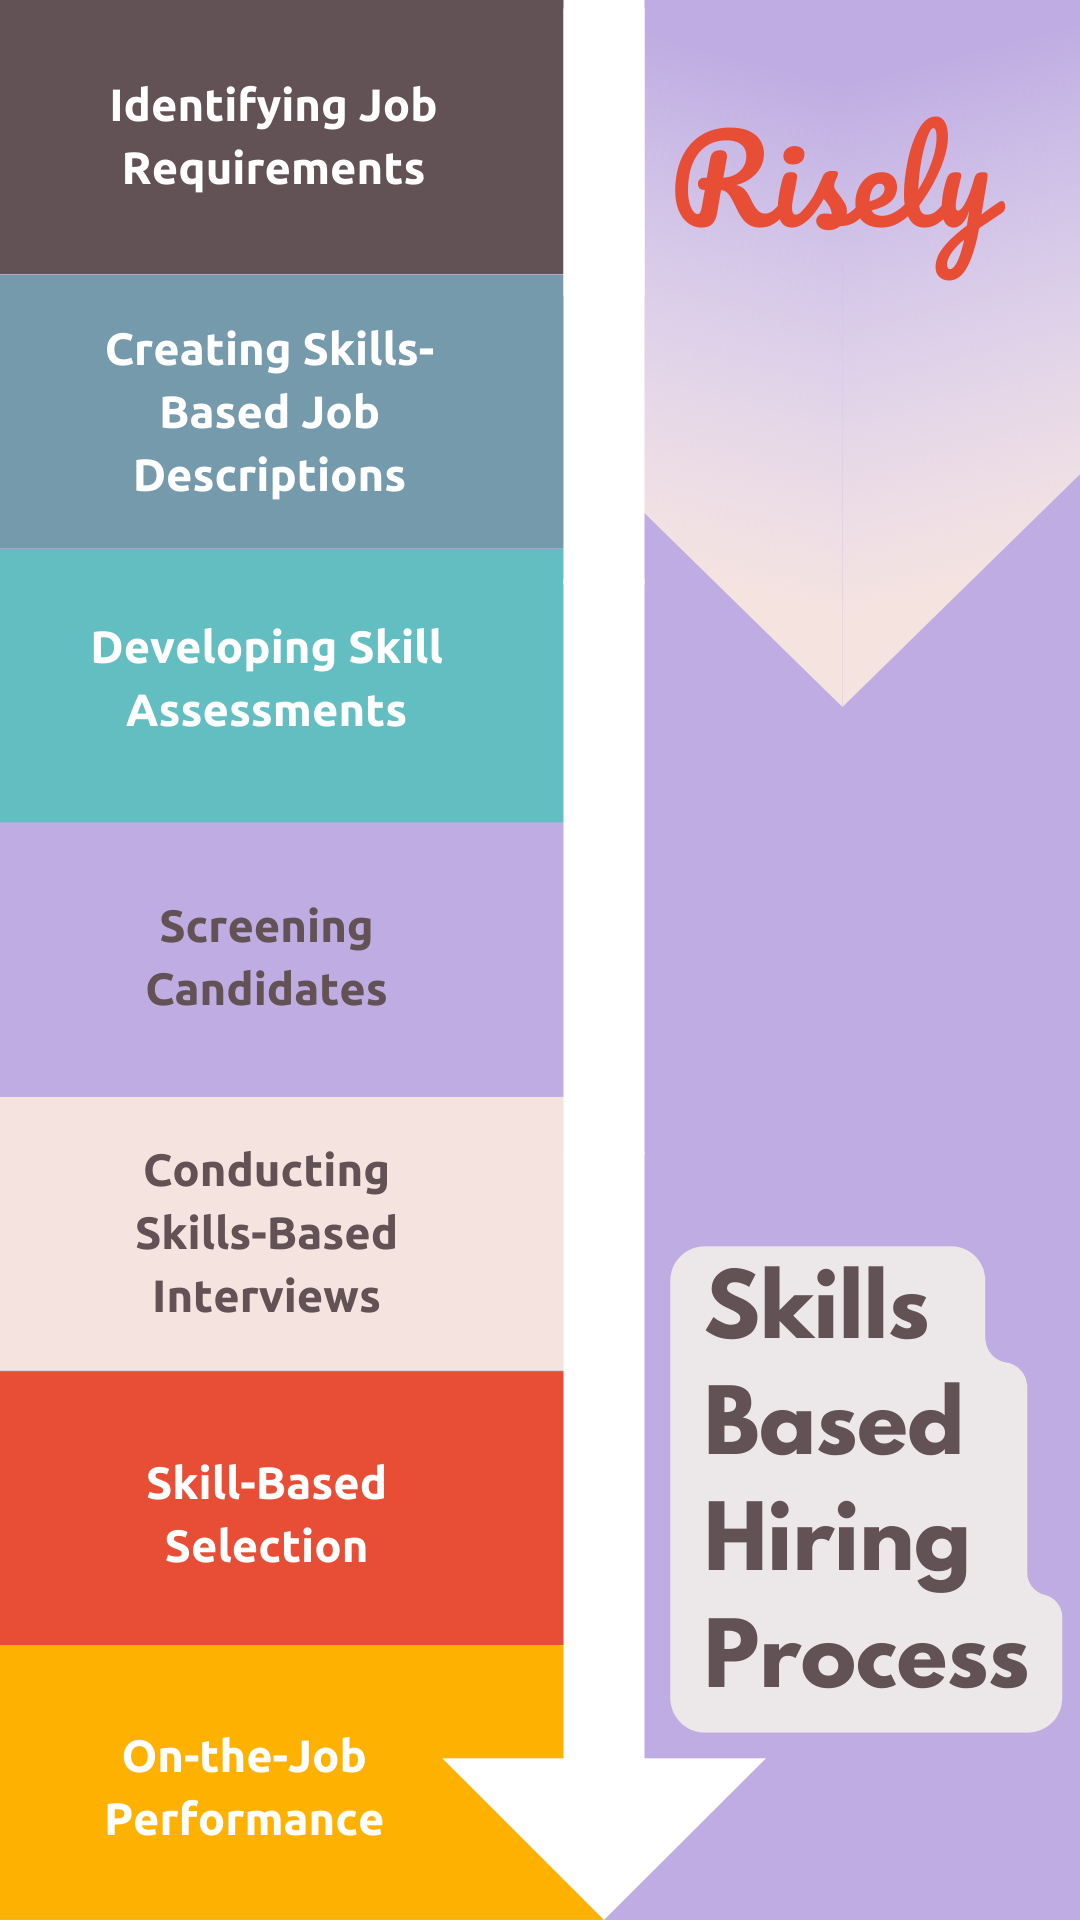 skills based hiring by Risely 